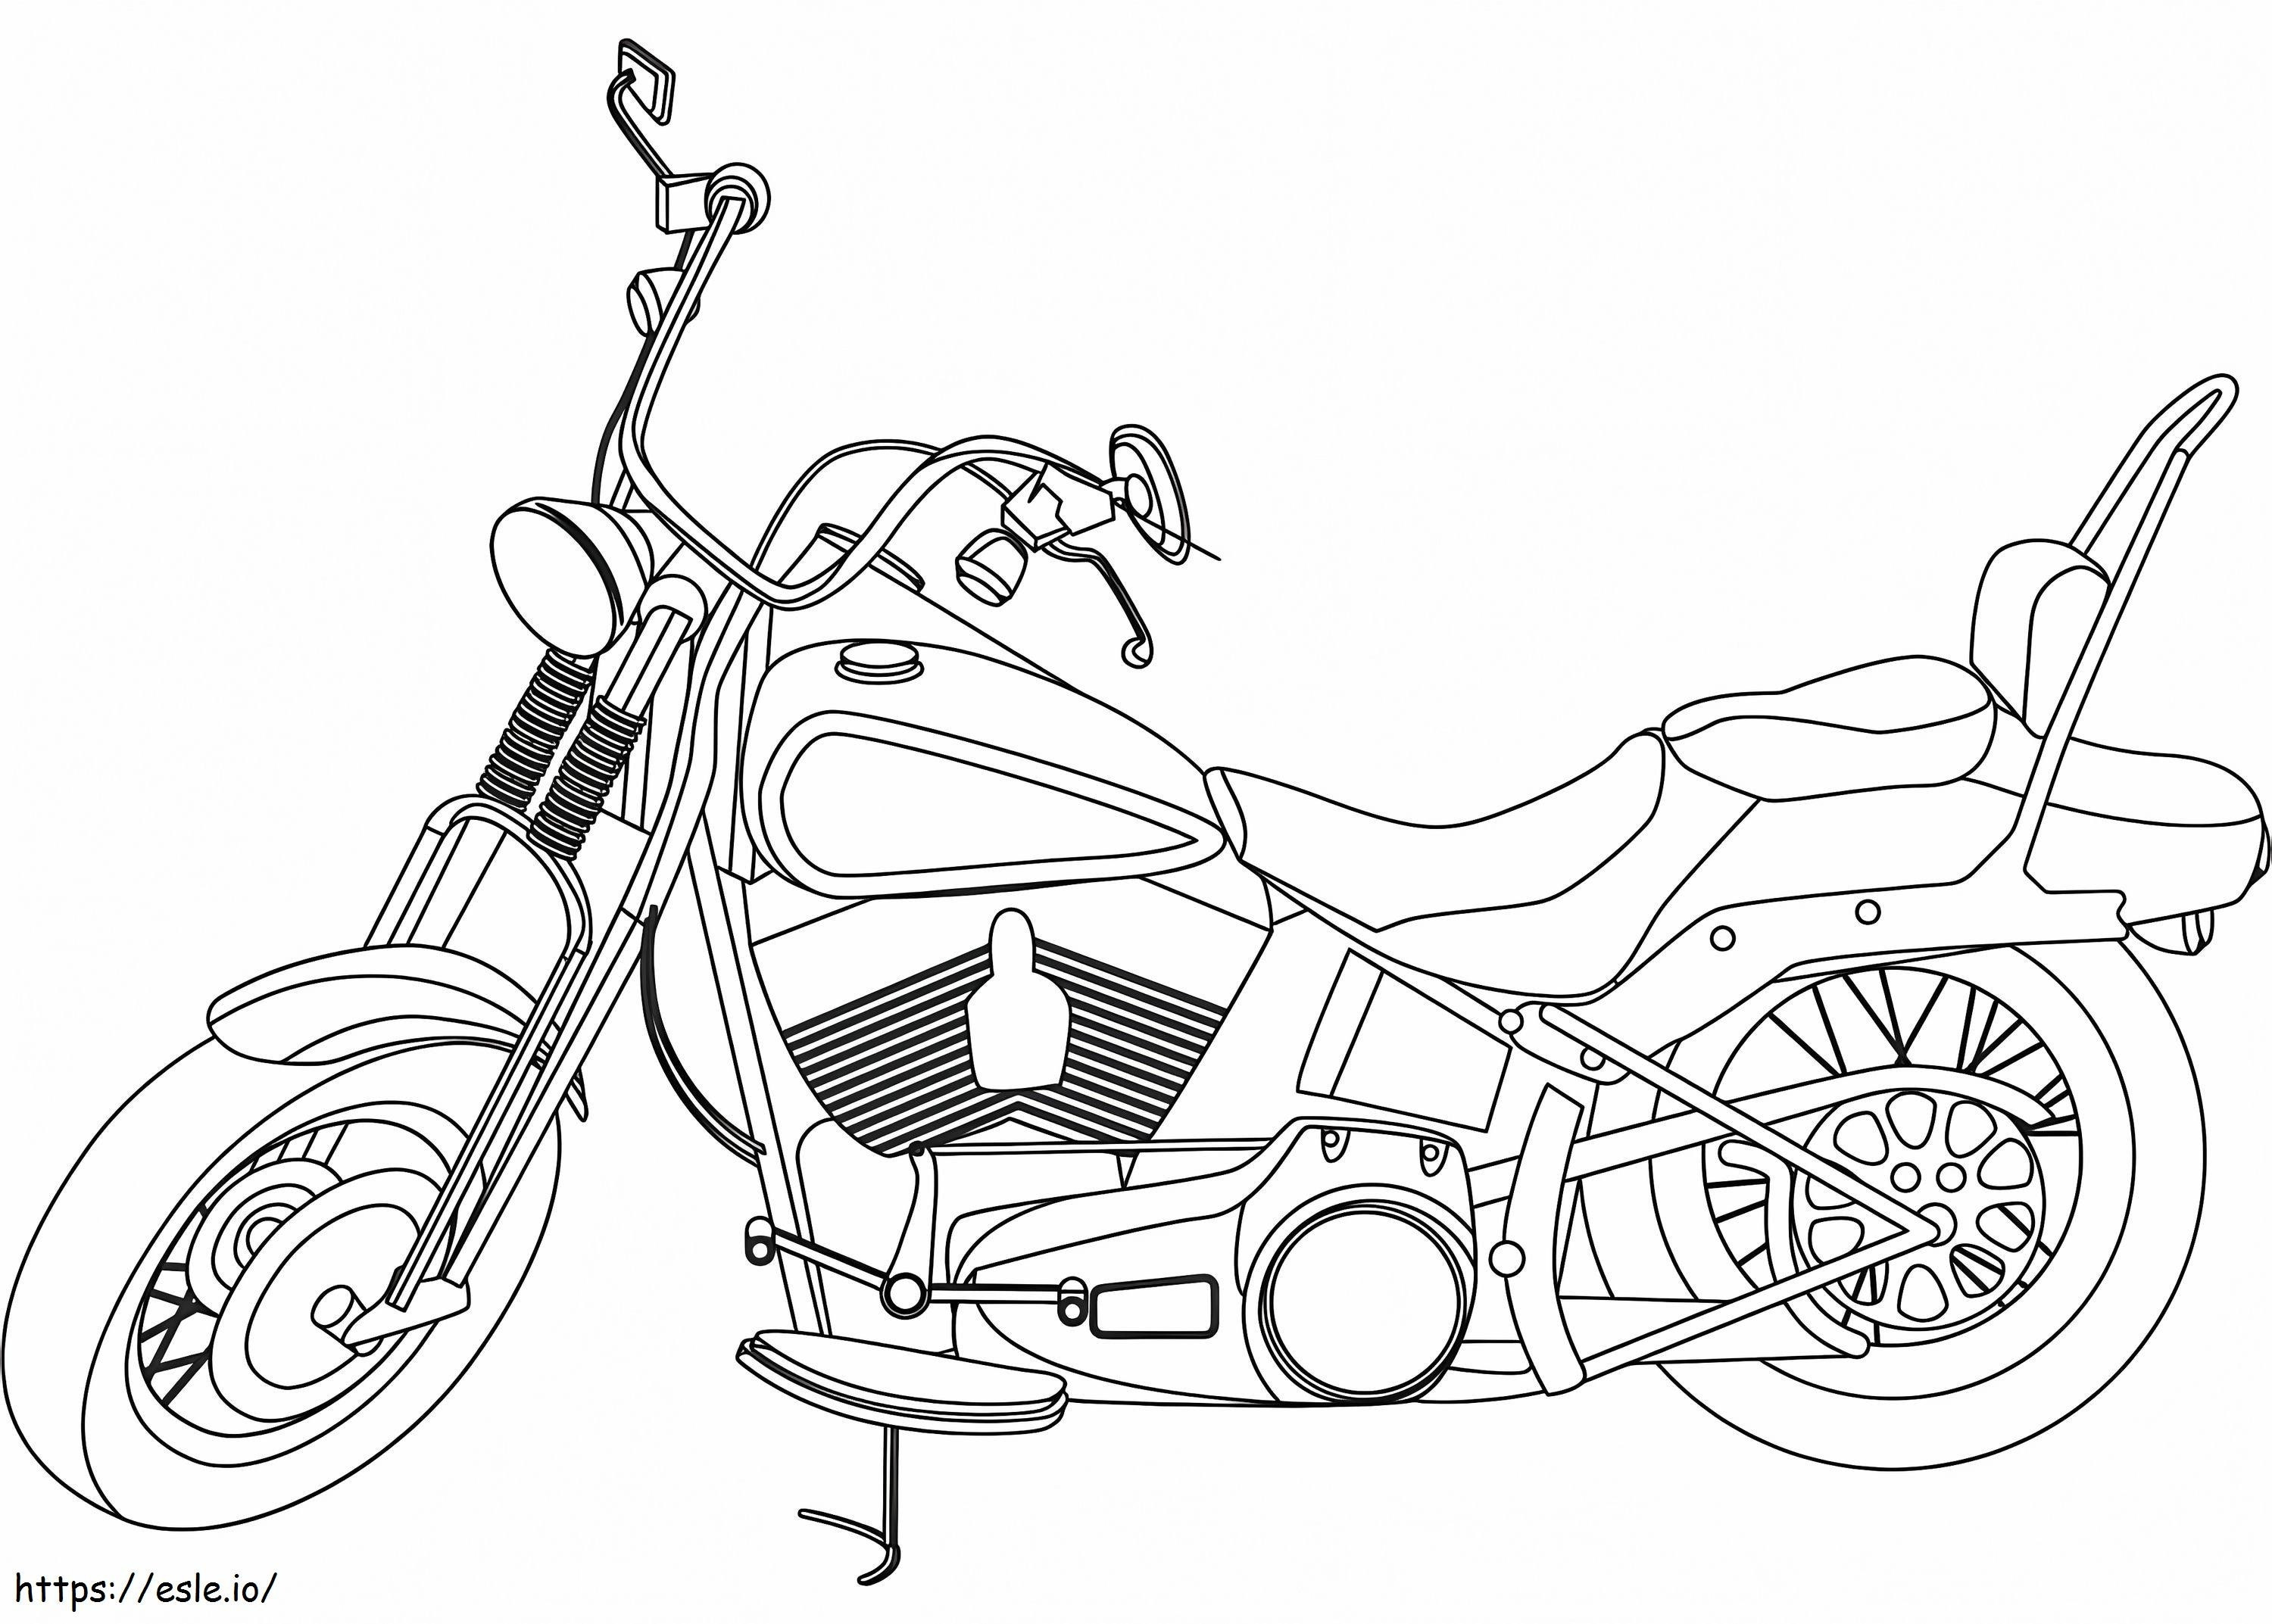 Awesome Harley Davidson Motorcycle coloring page